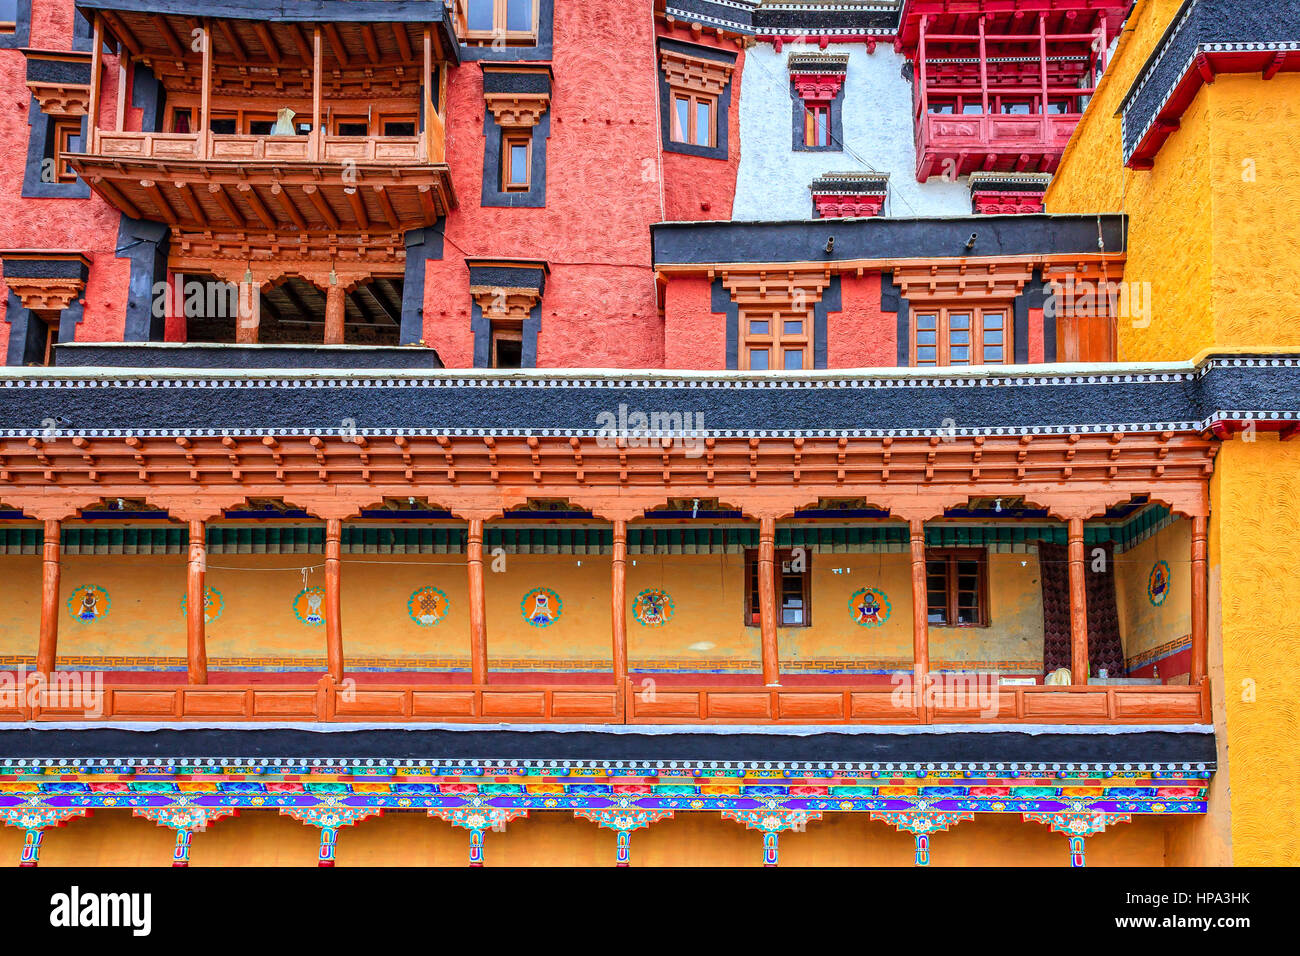 Fragment of residential quarters building in a Buddhist monastery in Kashmir, India Stock Photo